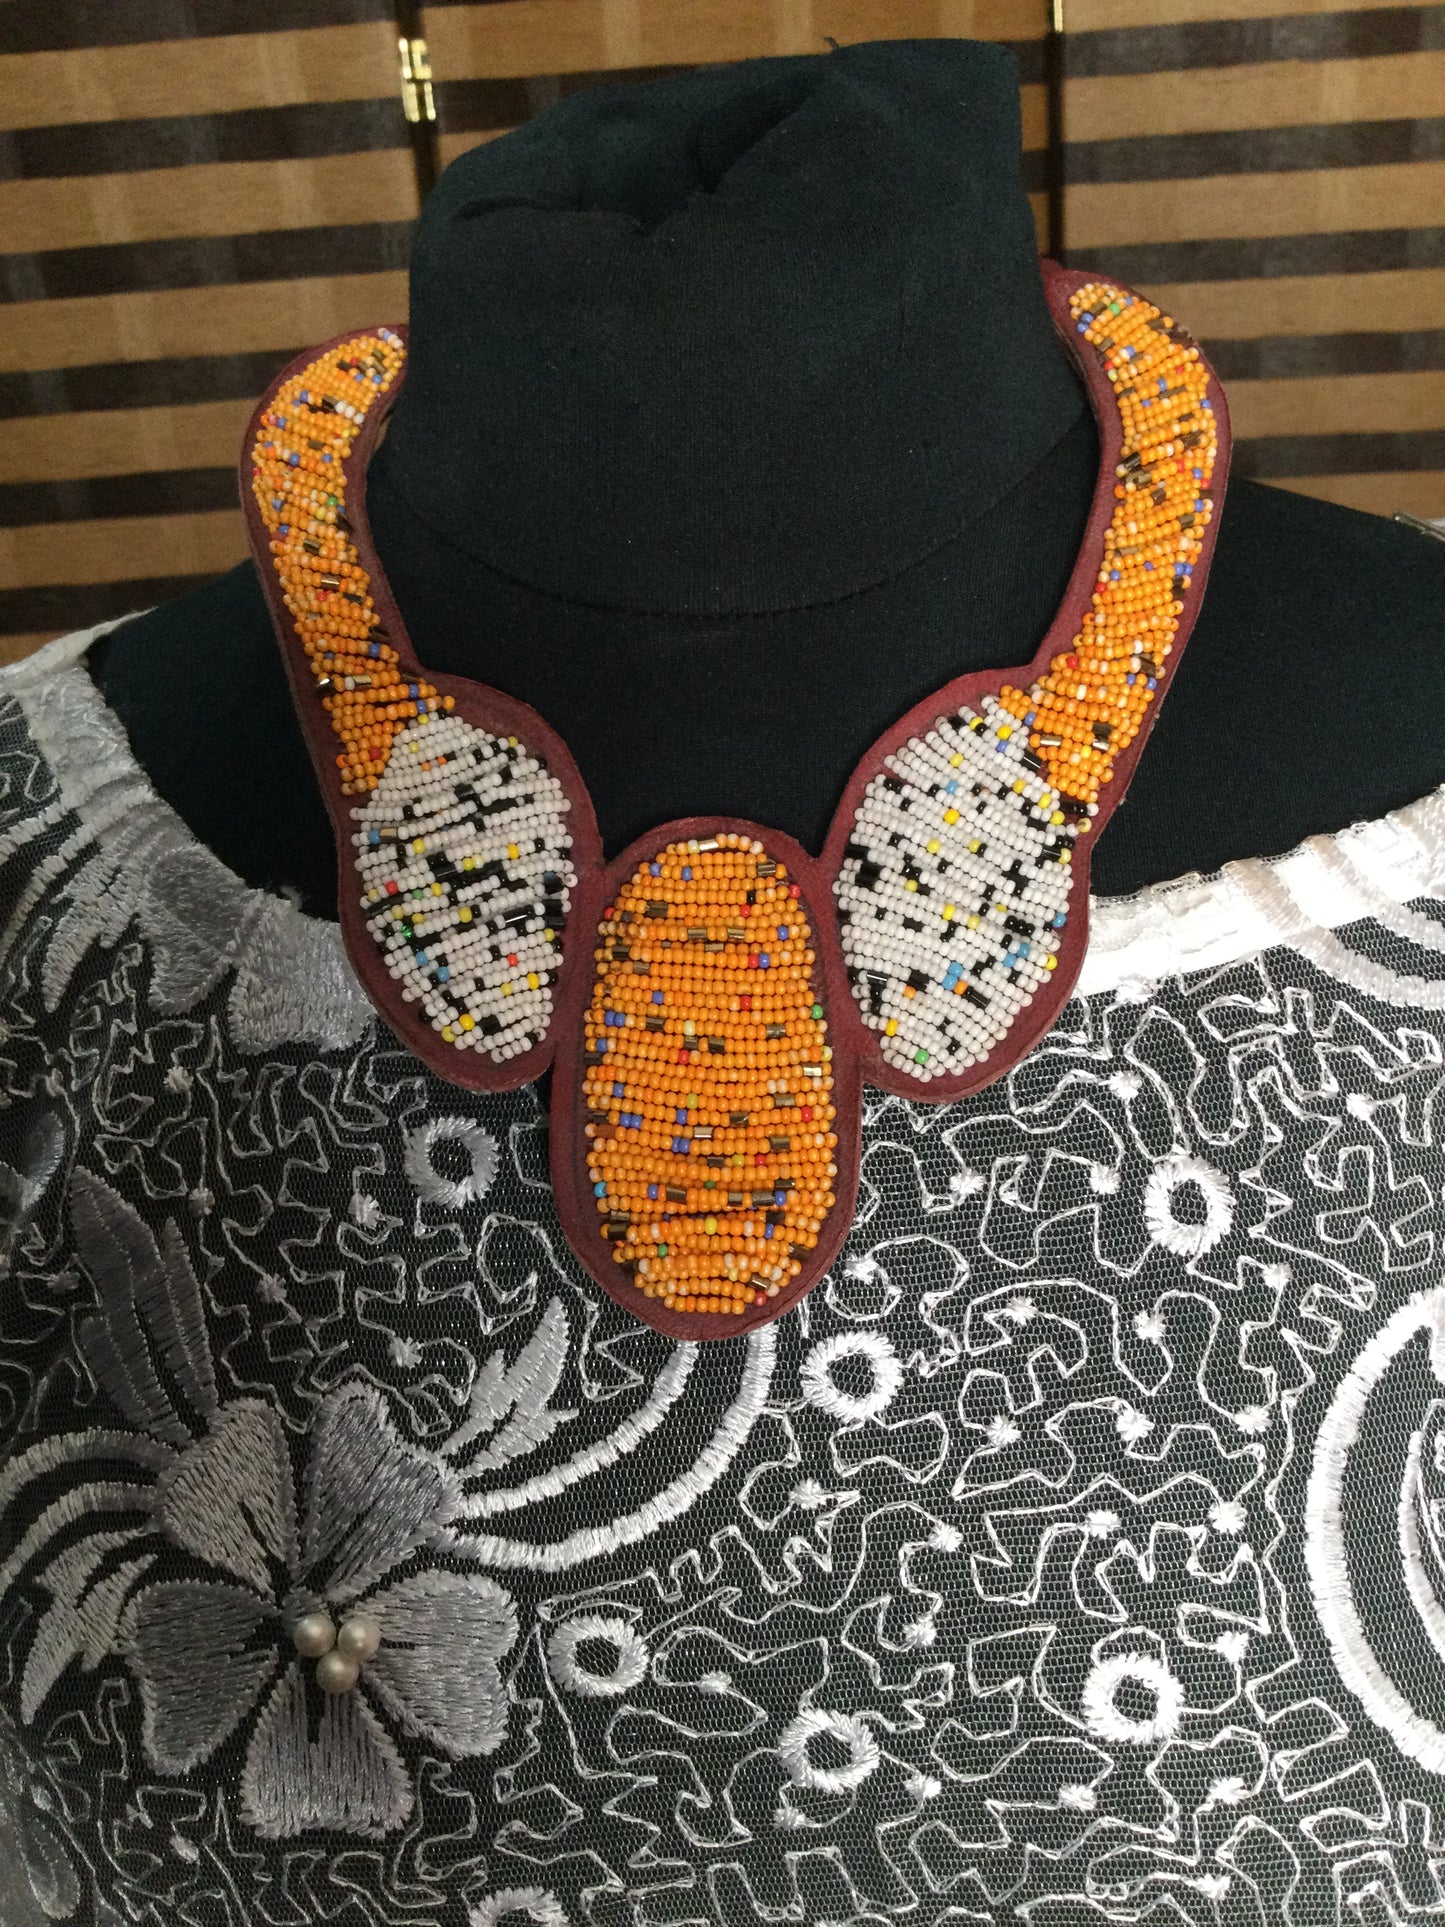 Beautiful bead and leather choker necklace